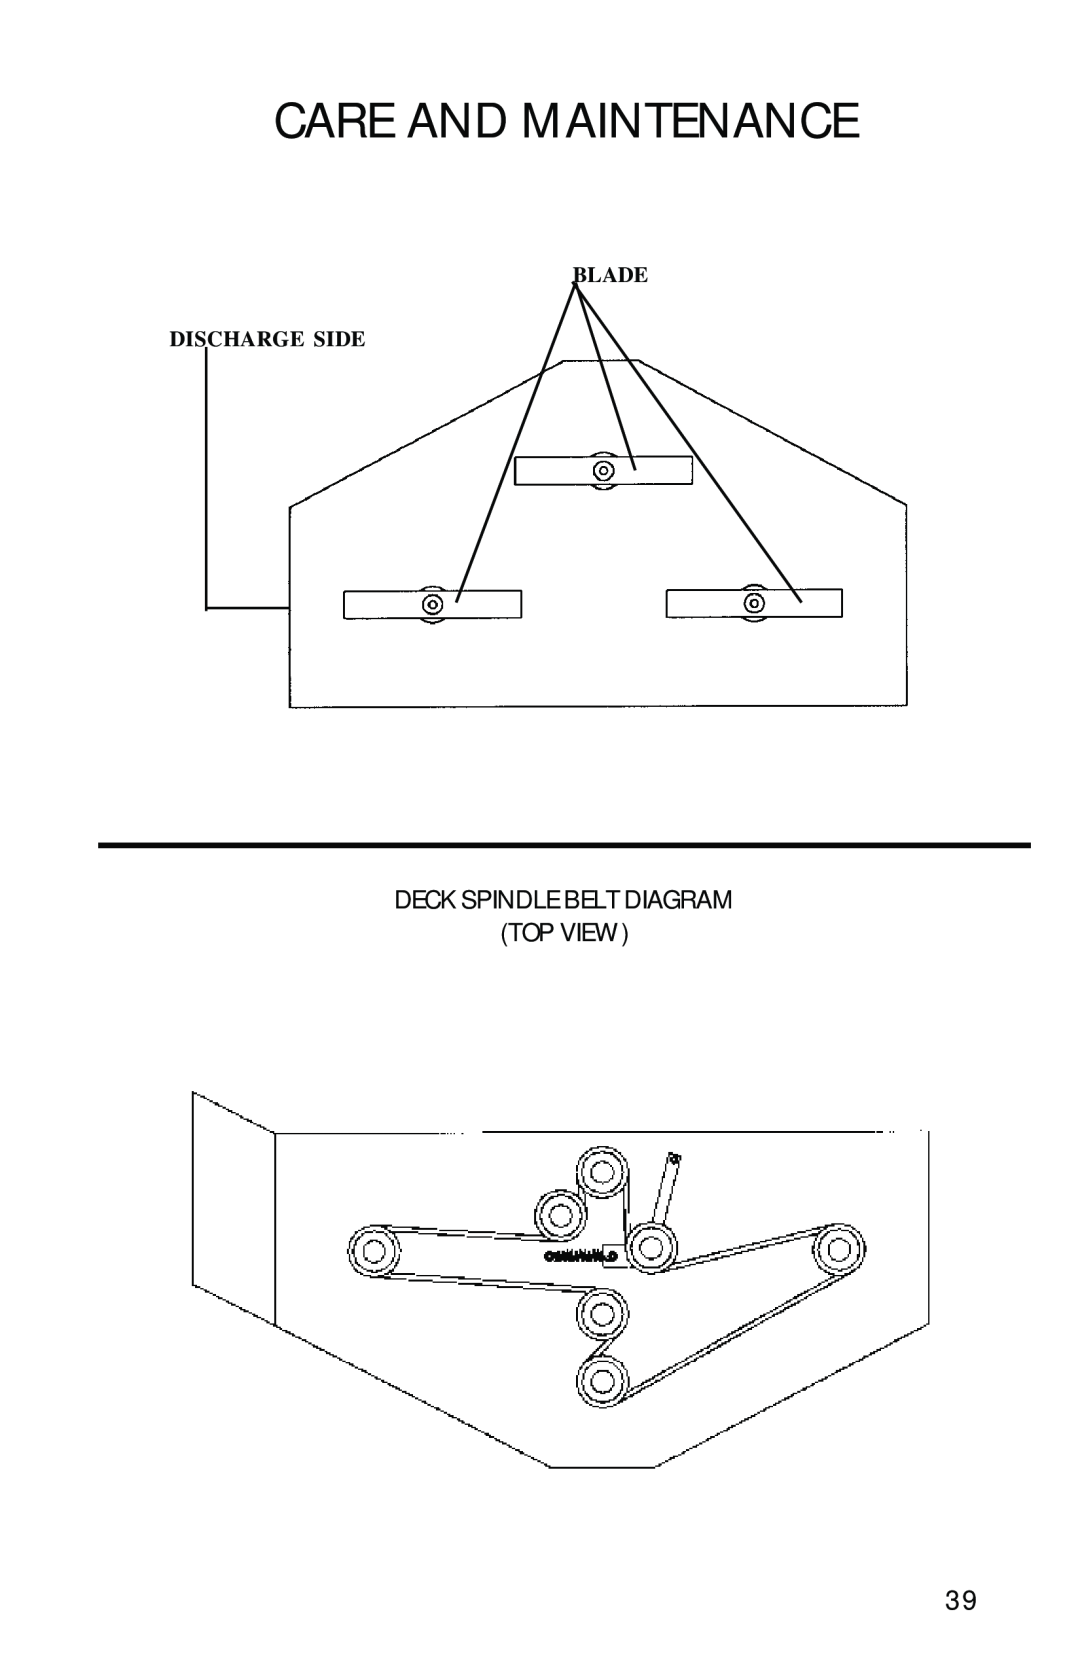 Dixon 13090-0601, ZTR 6023 manual Care And Maintenance, Deck Spindle Belt Diagram Top View, Blade Discharge Side 